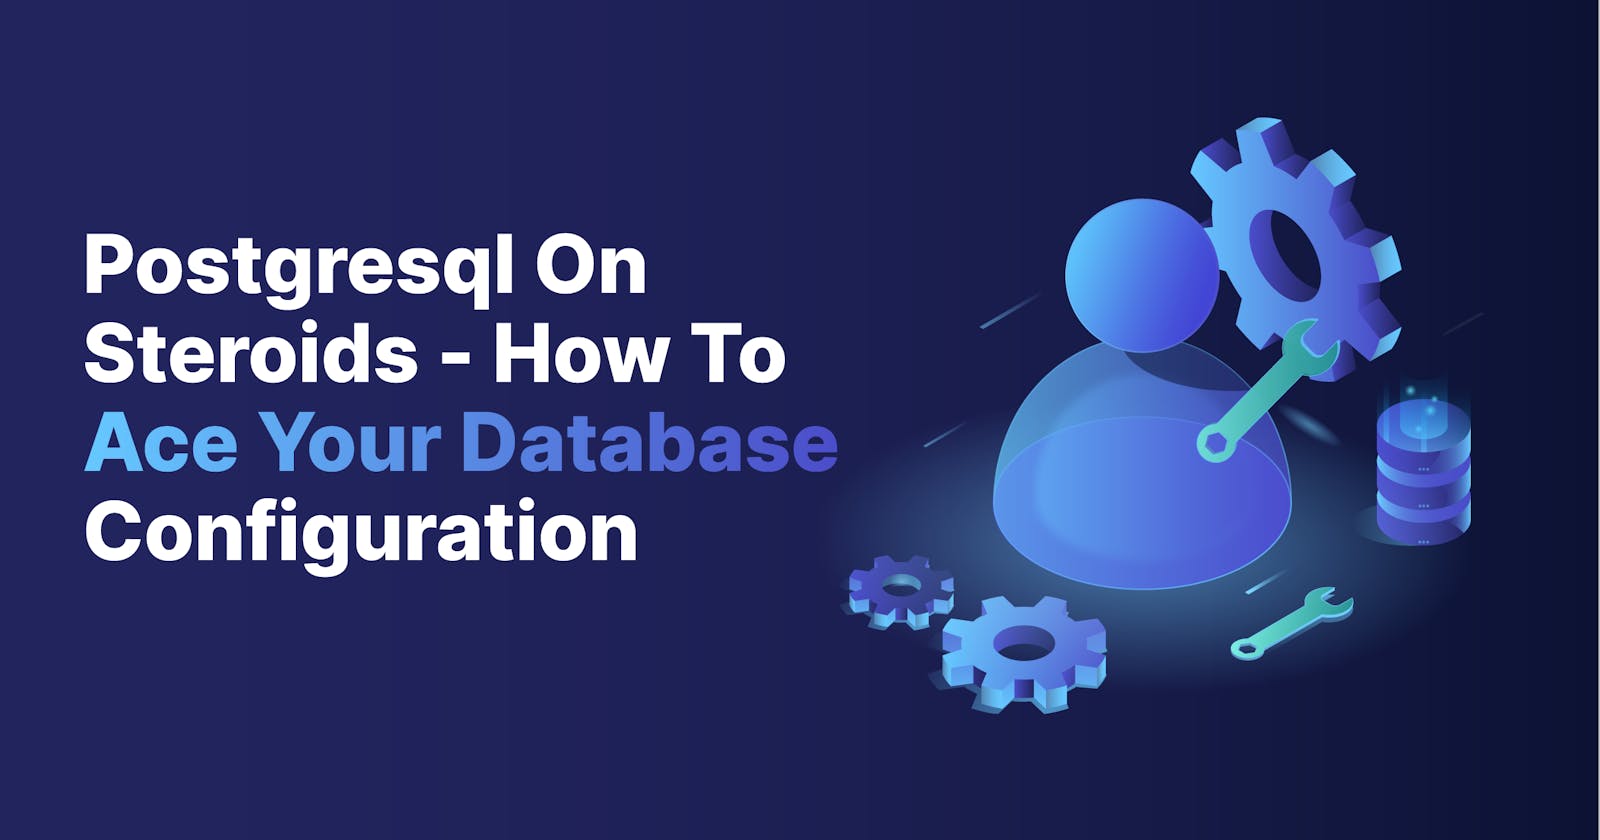 PostgreSQL on steroids - how to ace your database configuration